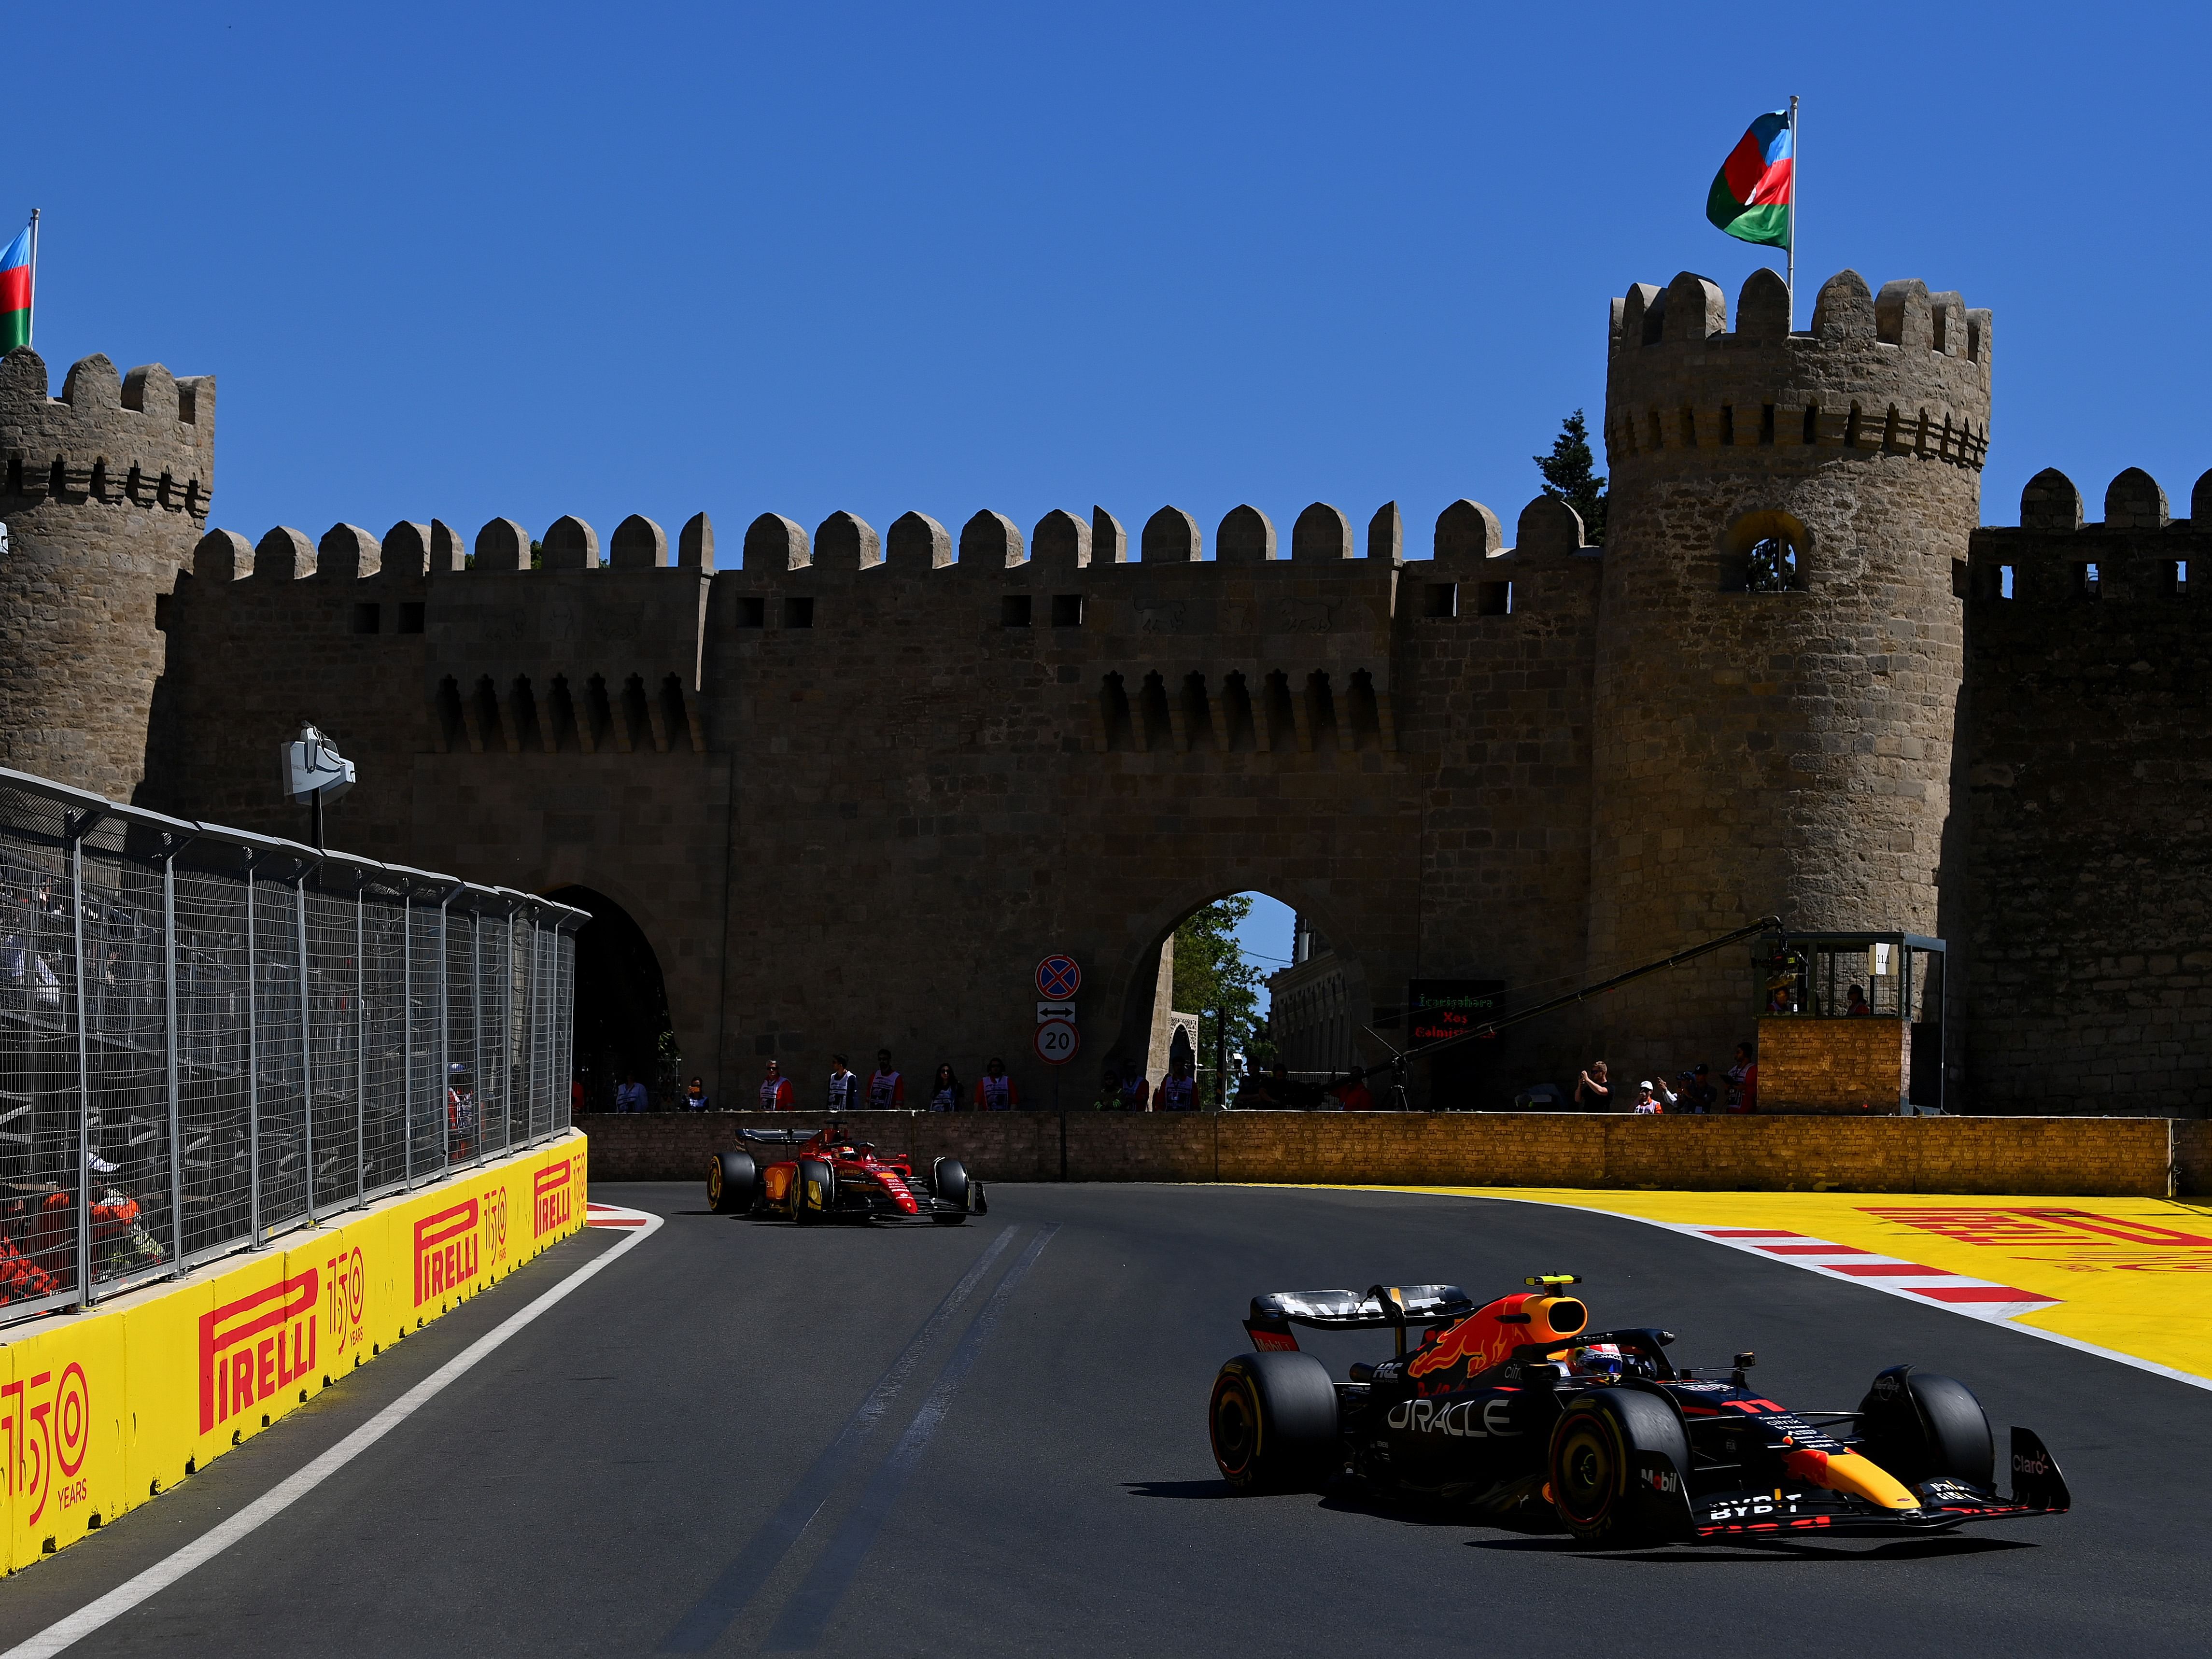 Sergio Perez (11) leads Charles Leclerc (16) on lap one during the 2022 F1 Azerbaijan Grand Prix. (Photo by Dan Mullan/Getty Images)